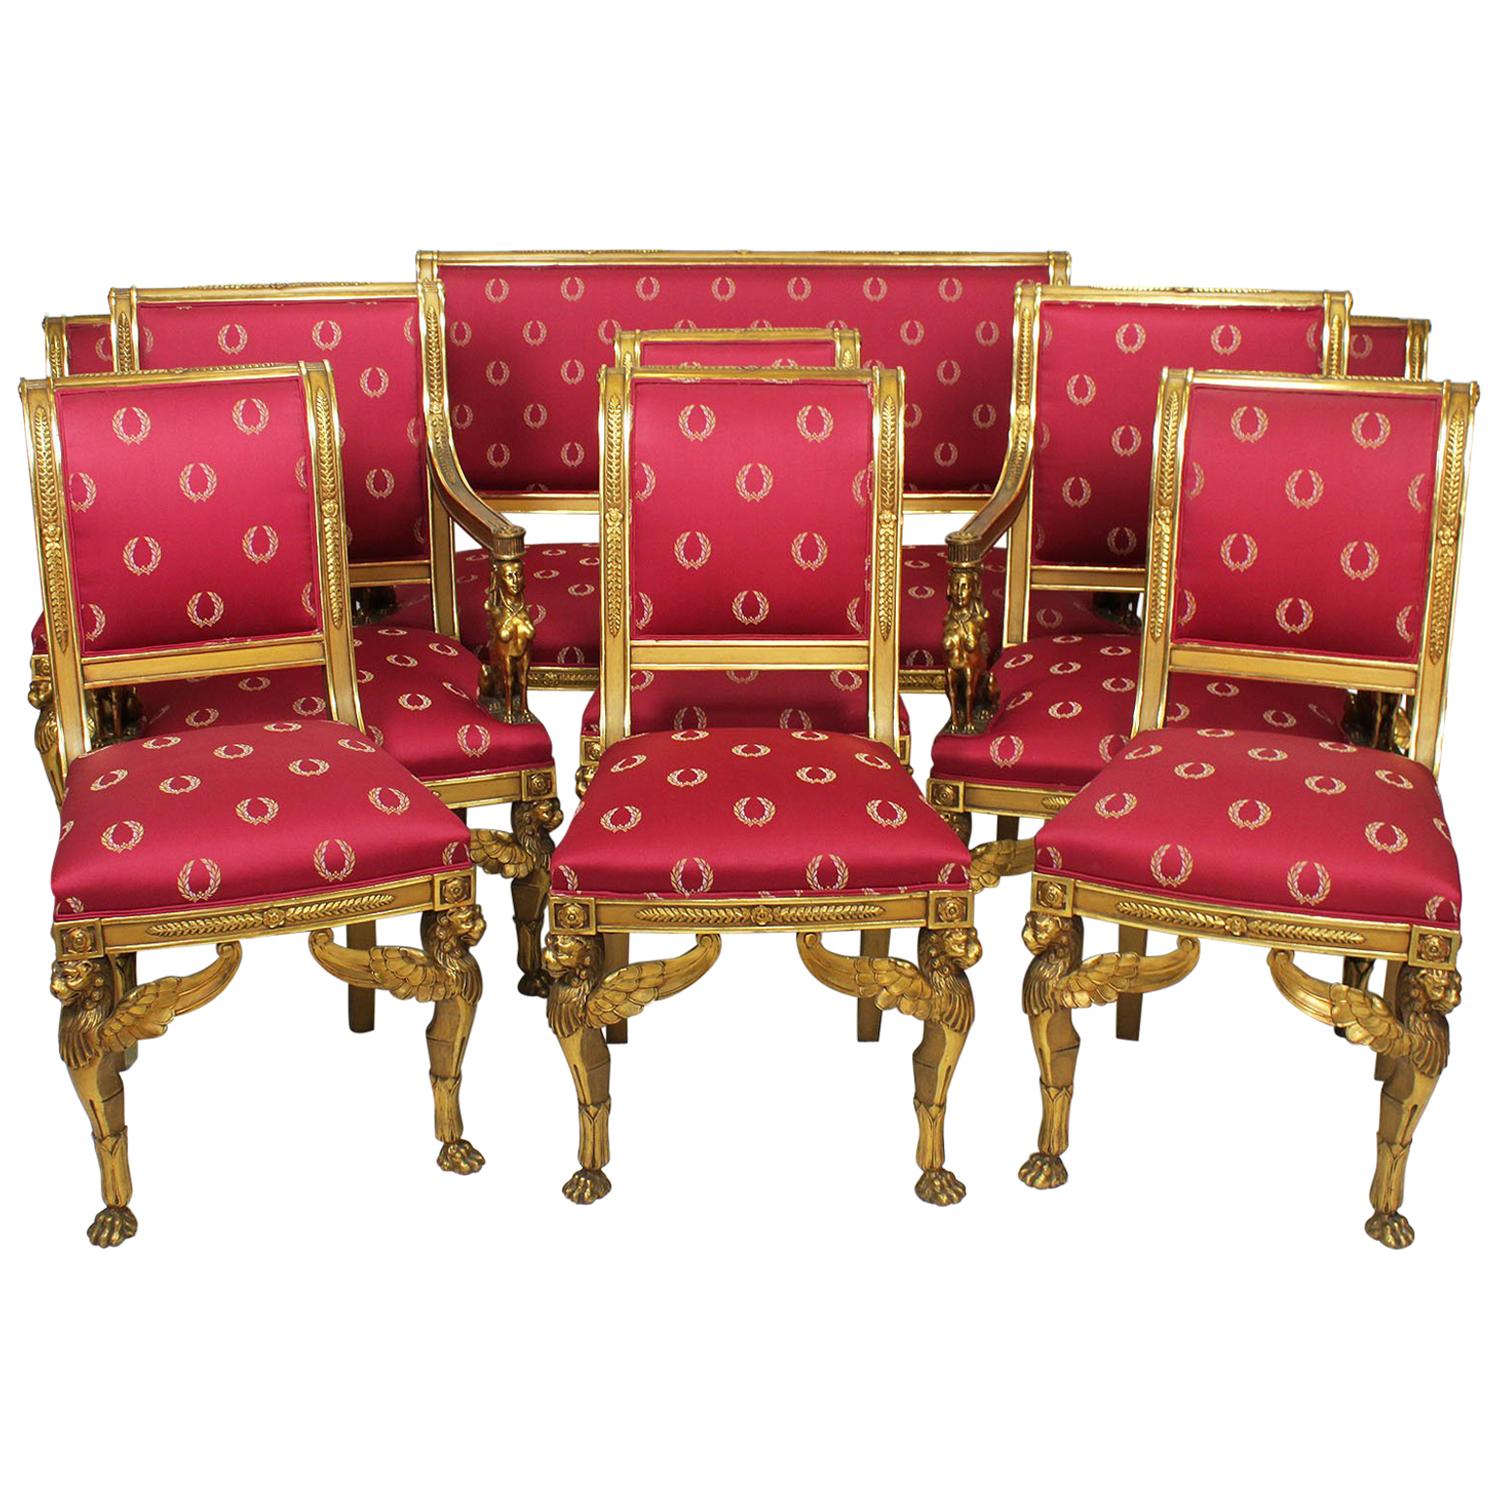 Fine French 19th Century Empire Revival Nine Piece Giltwood Carved Salon Suite